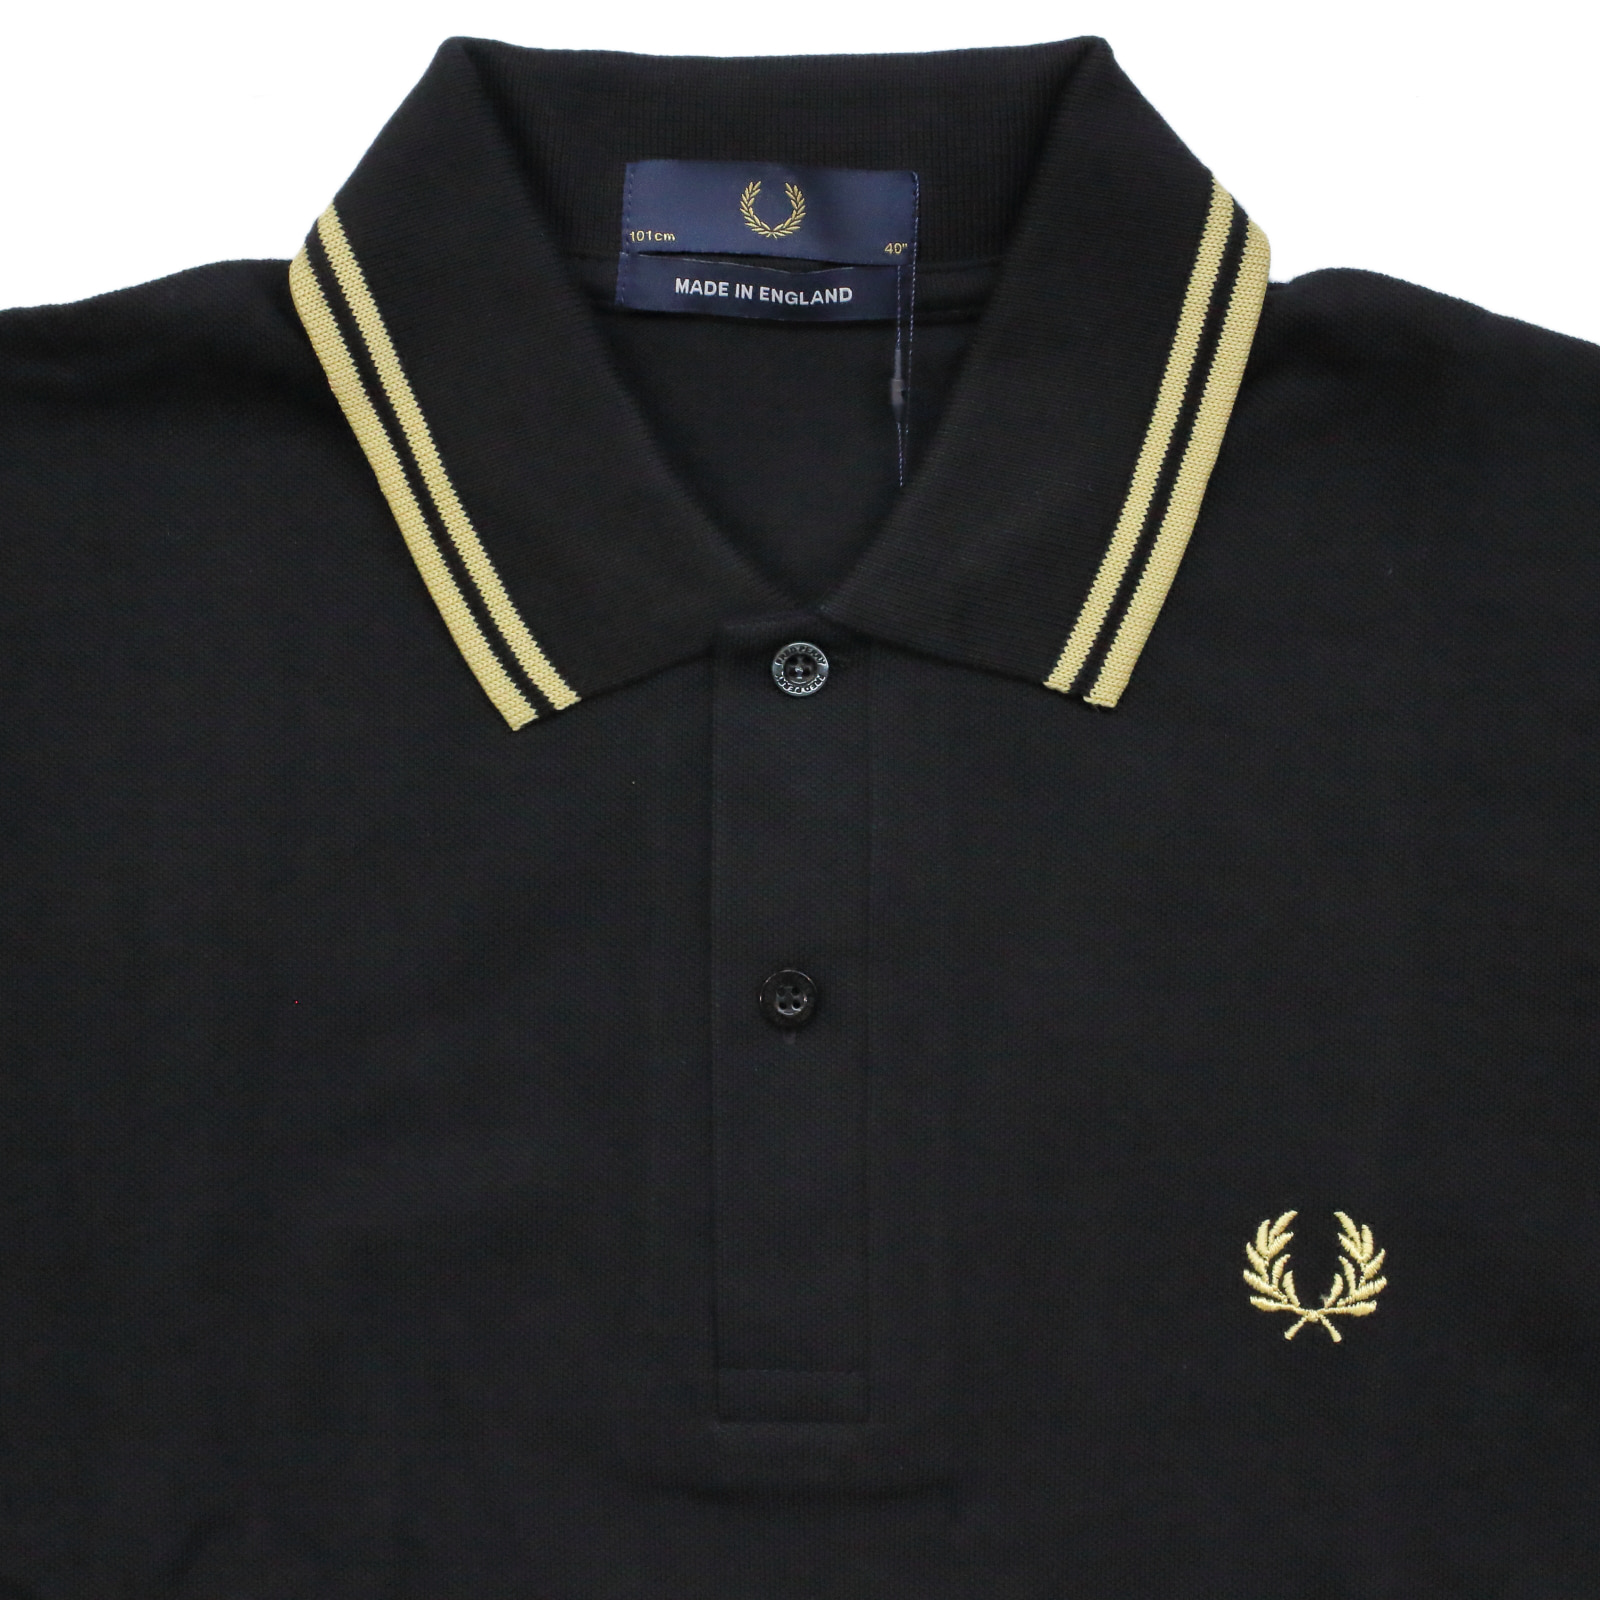 FRED PERRY フレッドペリー ポロシャツ/M12 THE FRED PERRY SHIRT【大きいサイズあり】 メンズ BLACKCHAMP